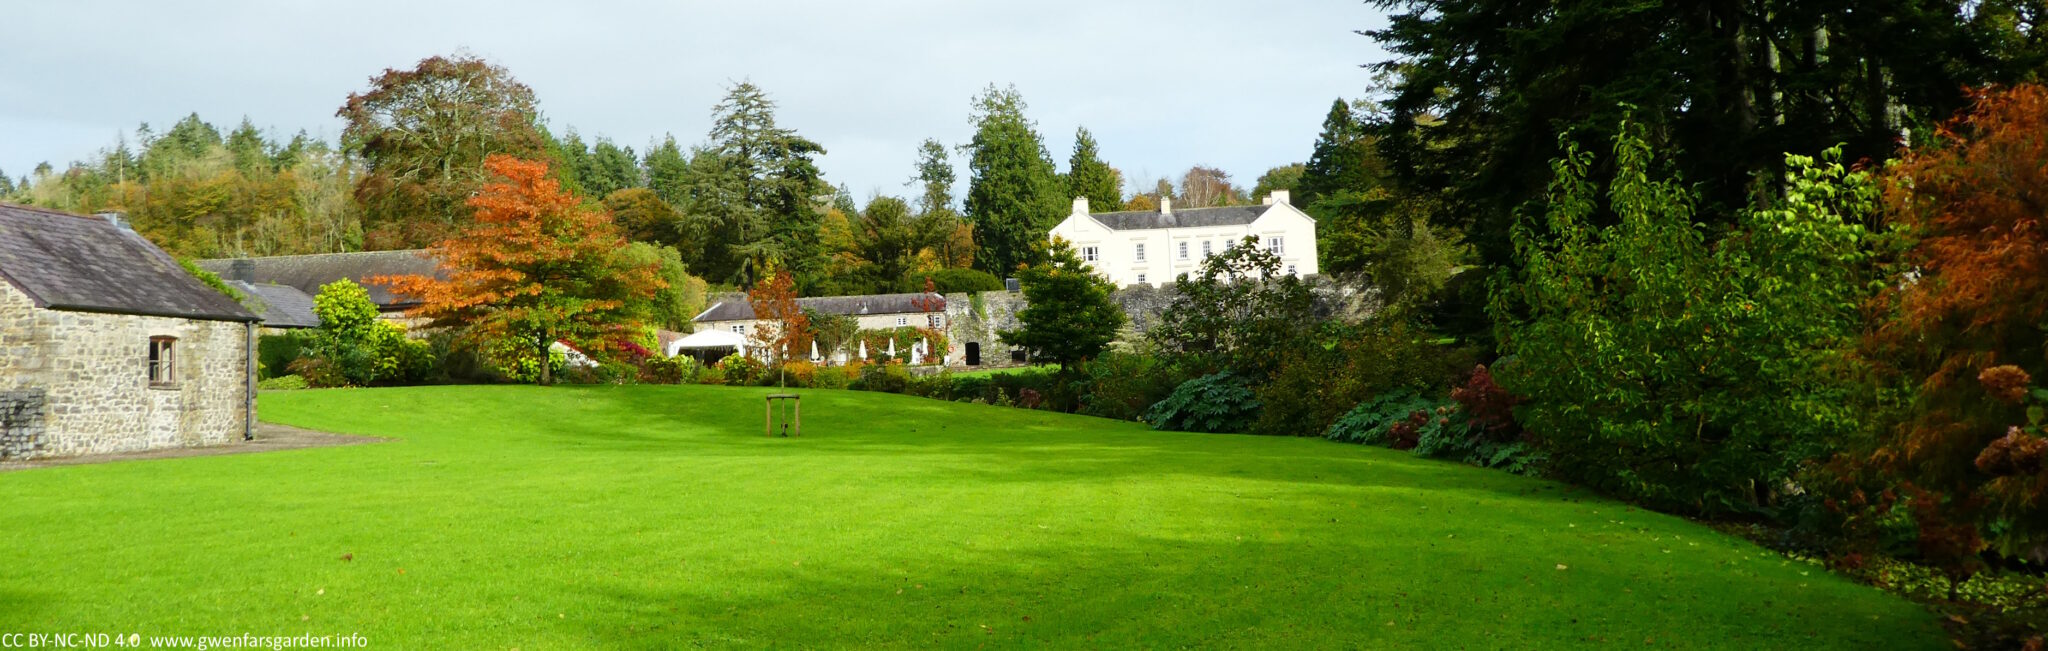 A landscape photo of a large area of lawn with lots of trees in different shades of autumn colours.